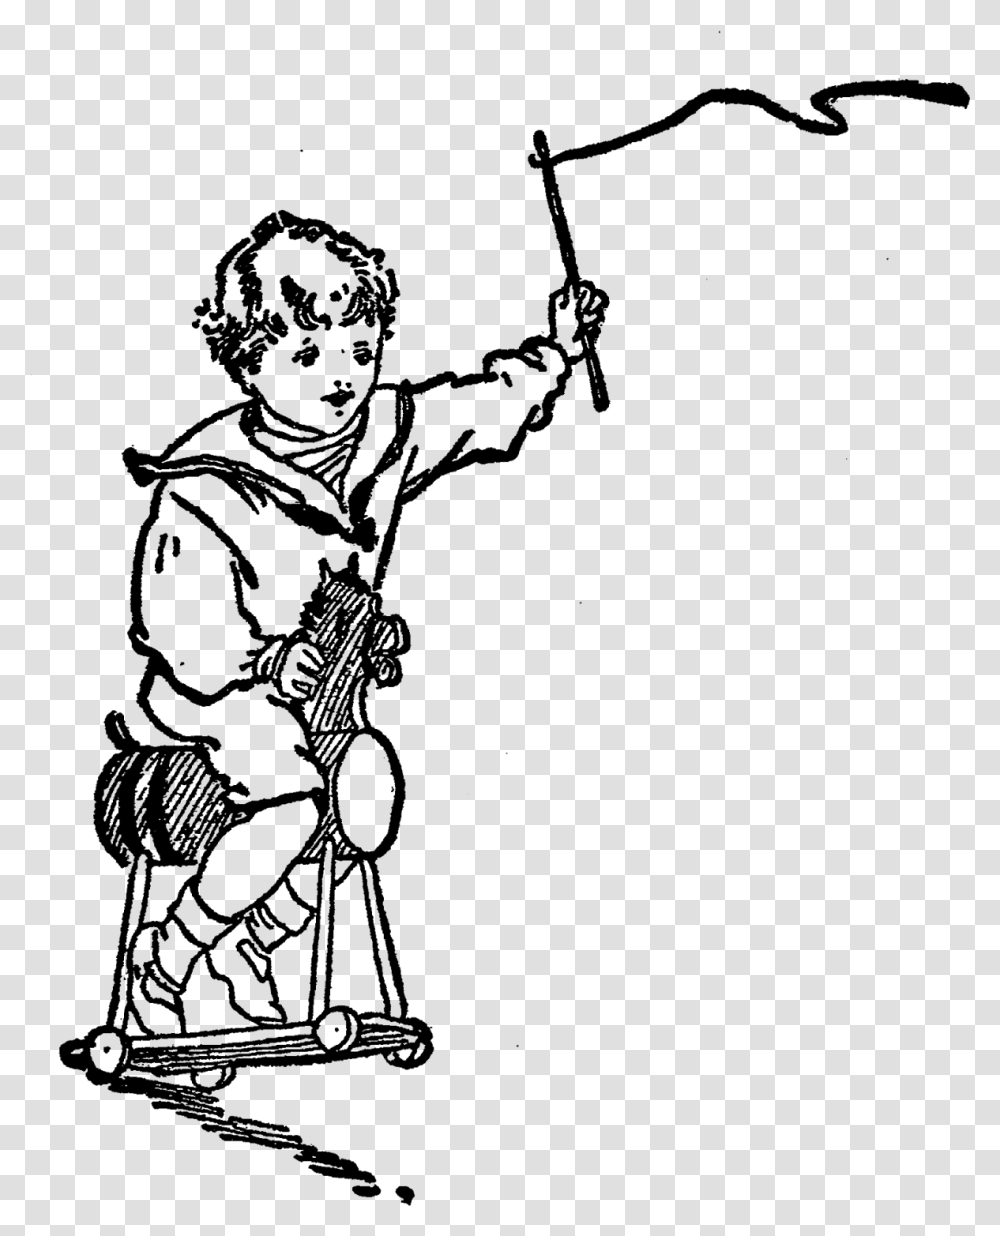 He's Got A Whip In Hand To Make The Horse Go Faster Drawing Vintage Boy, Nature, Outdoors, Night, Outer Space Transparent Png